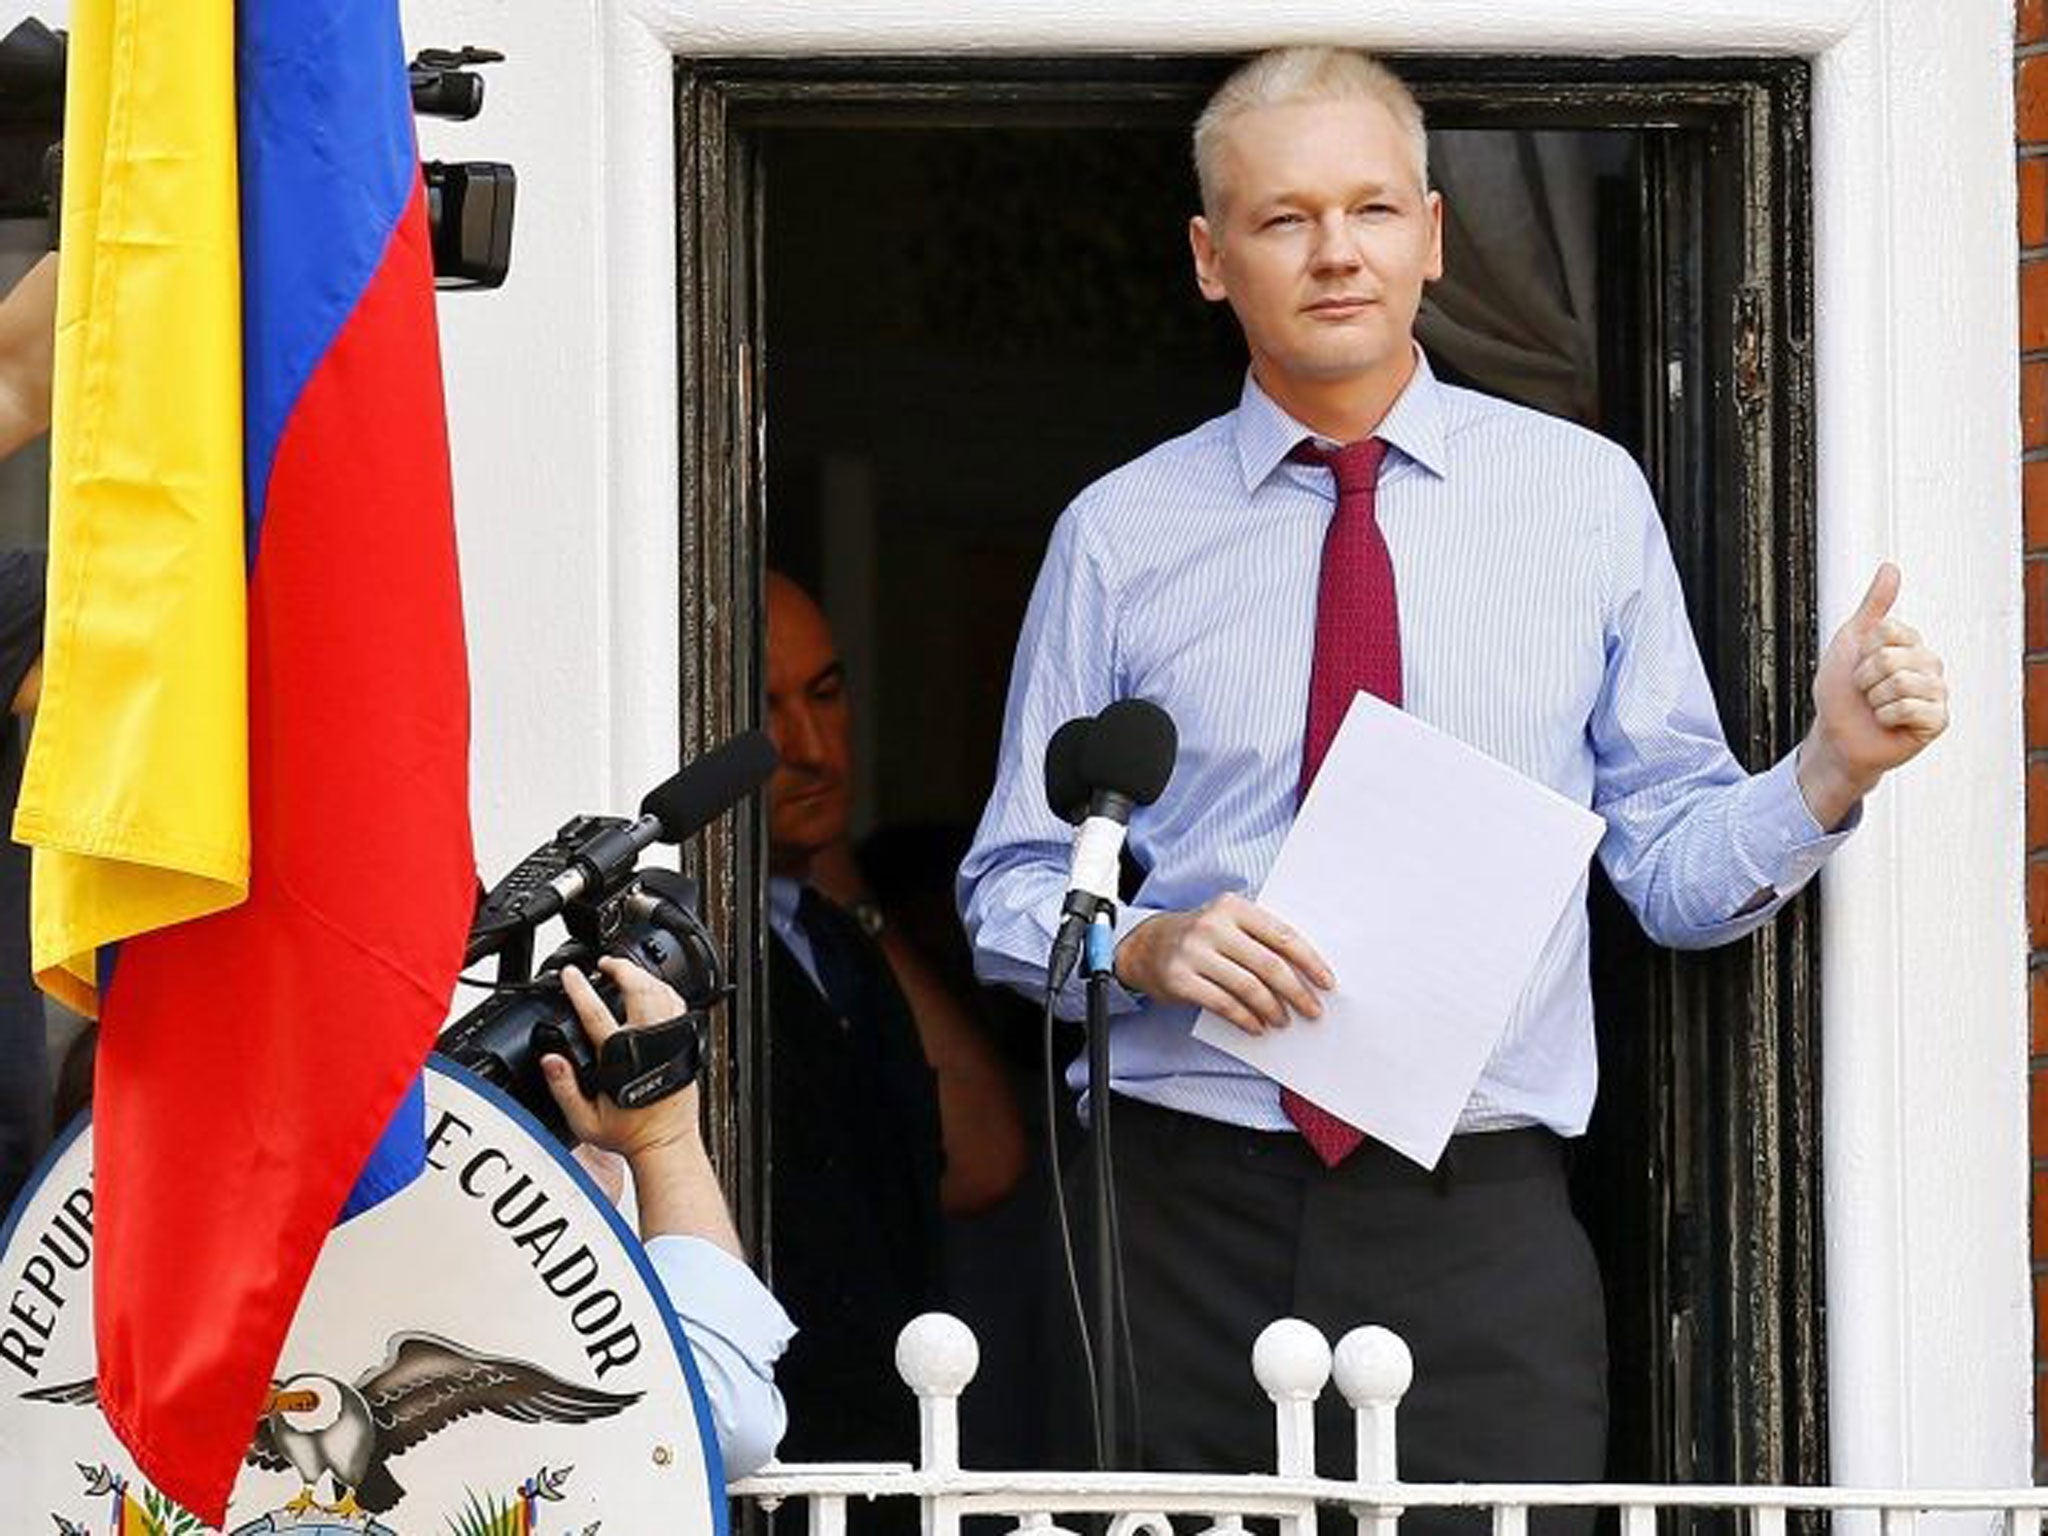 Julian Assange has been holed up in Ecuador's west London embassy for almost a year